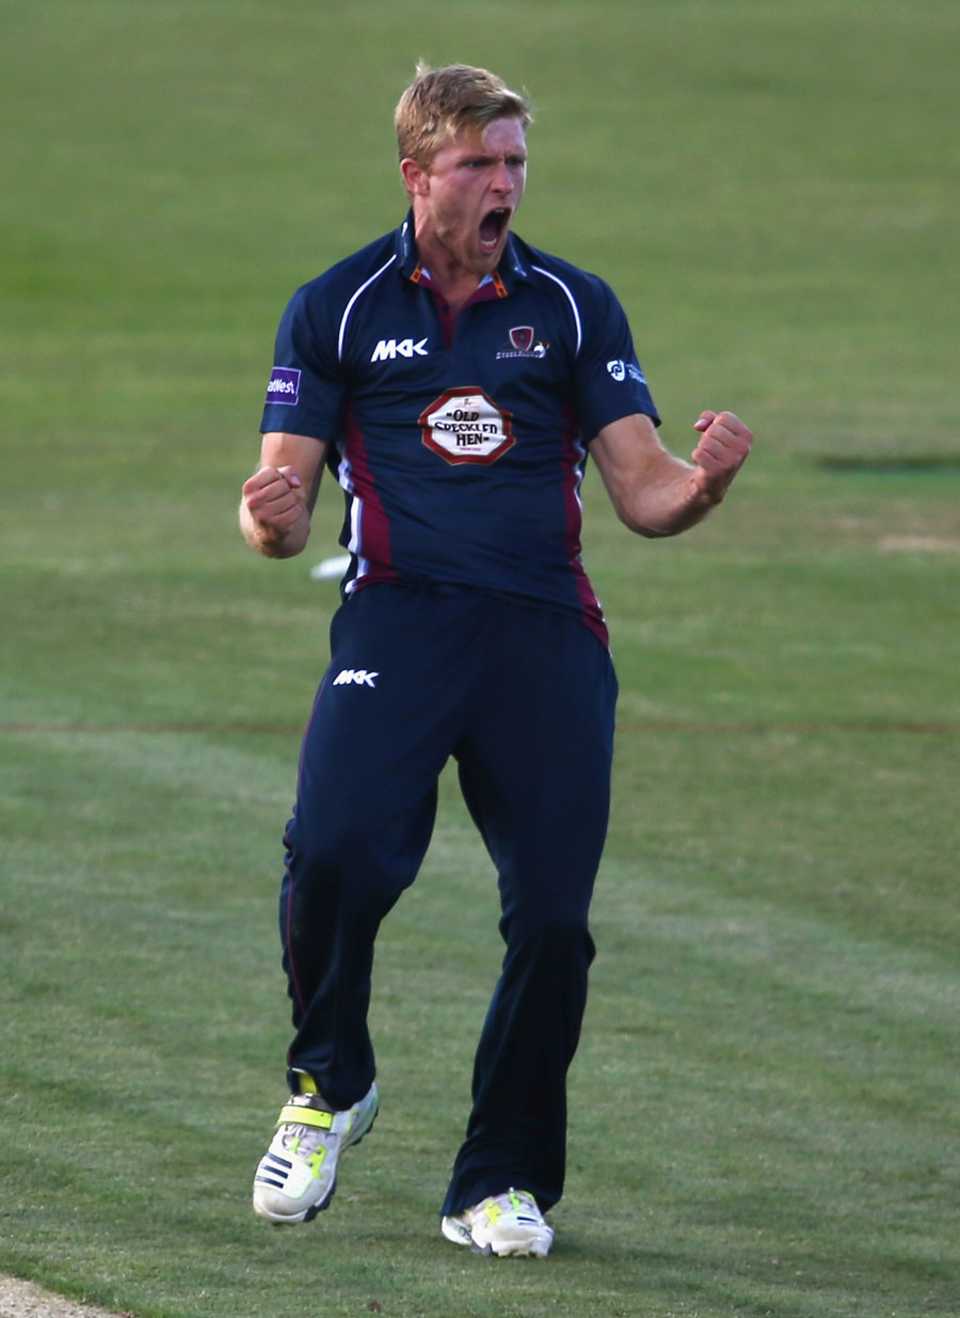 David Willey removed both openers